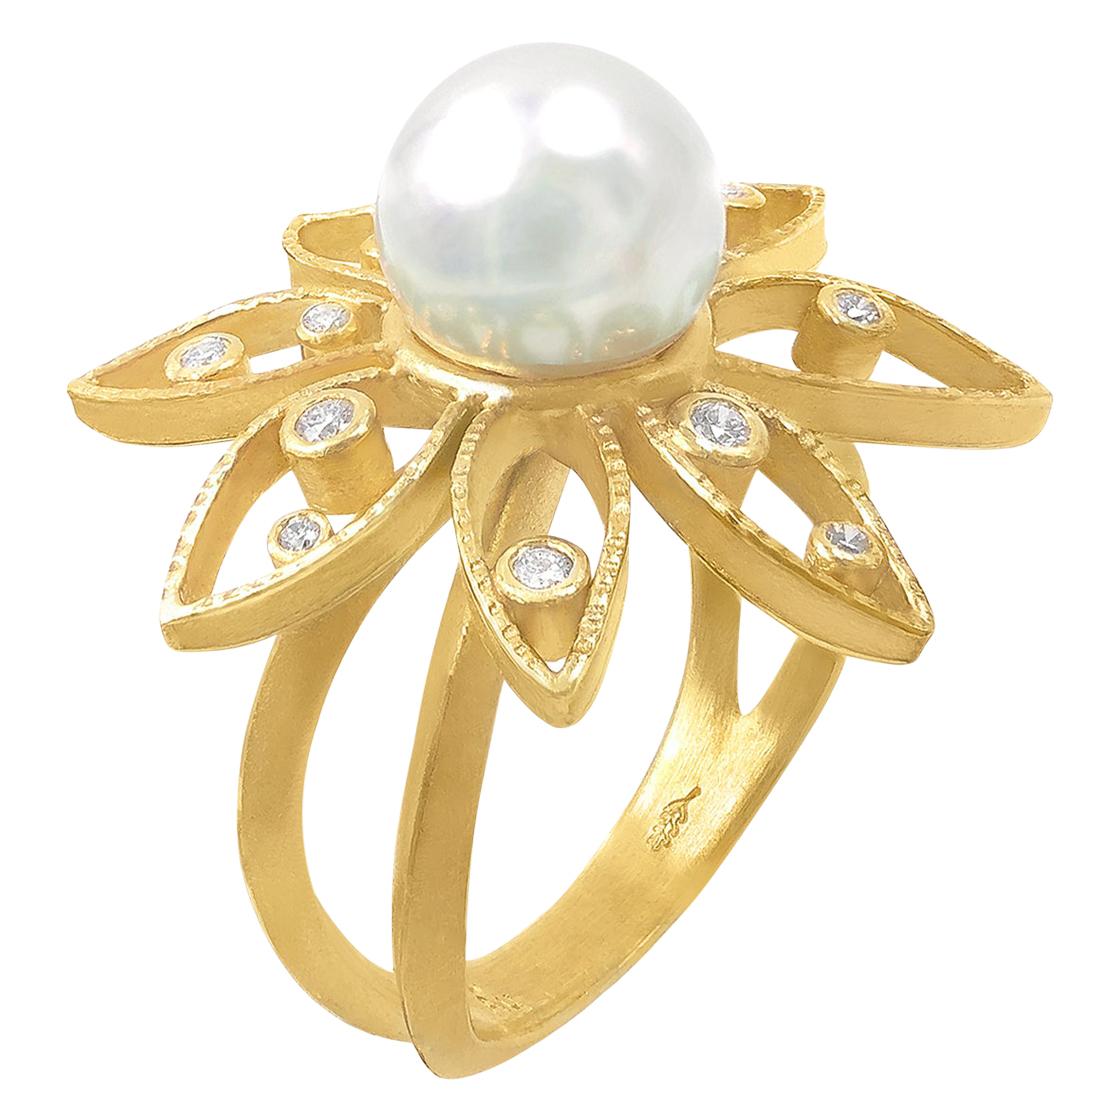 Barbara Heinrich Iridescent White Pearl White Diamond One of a Kind Daisy Ring